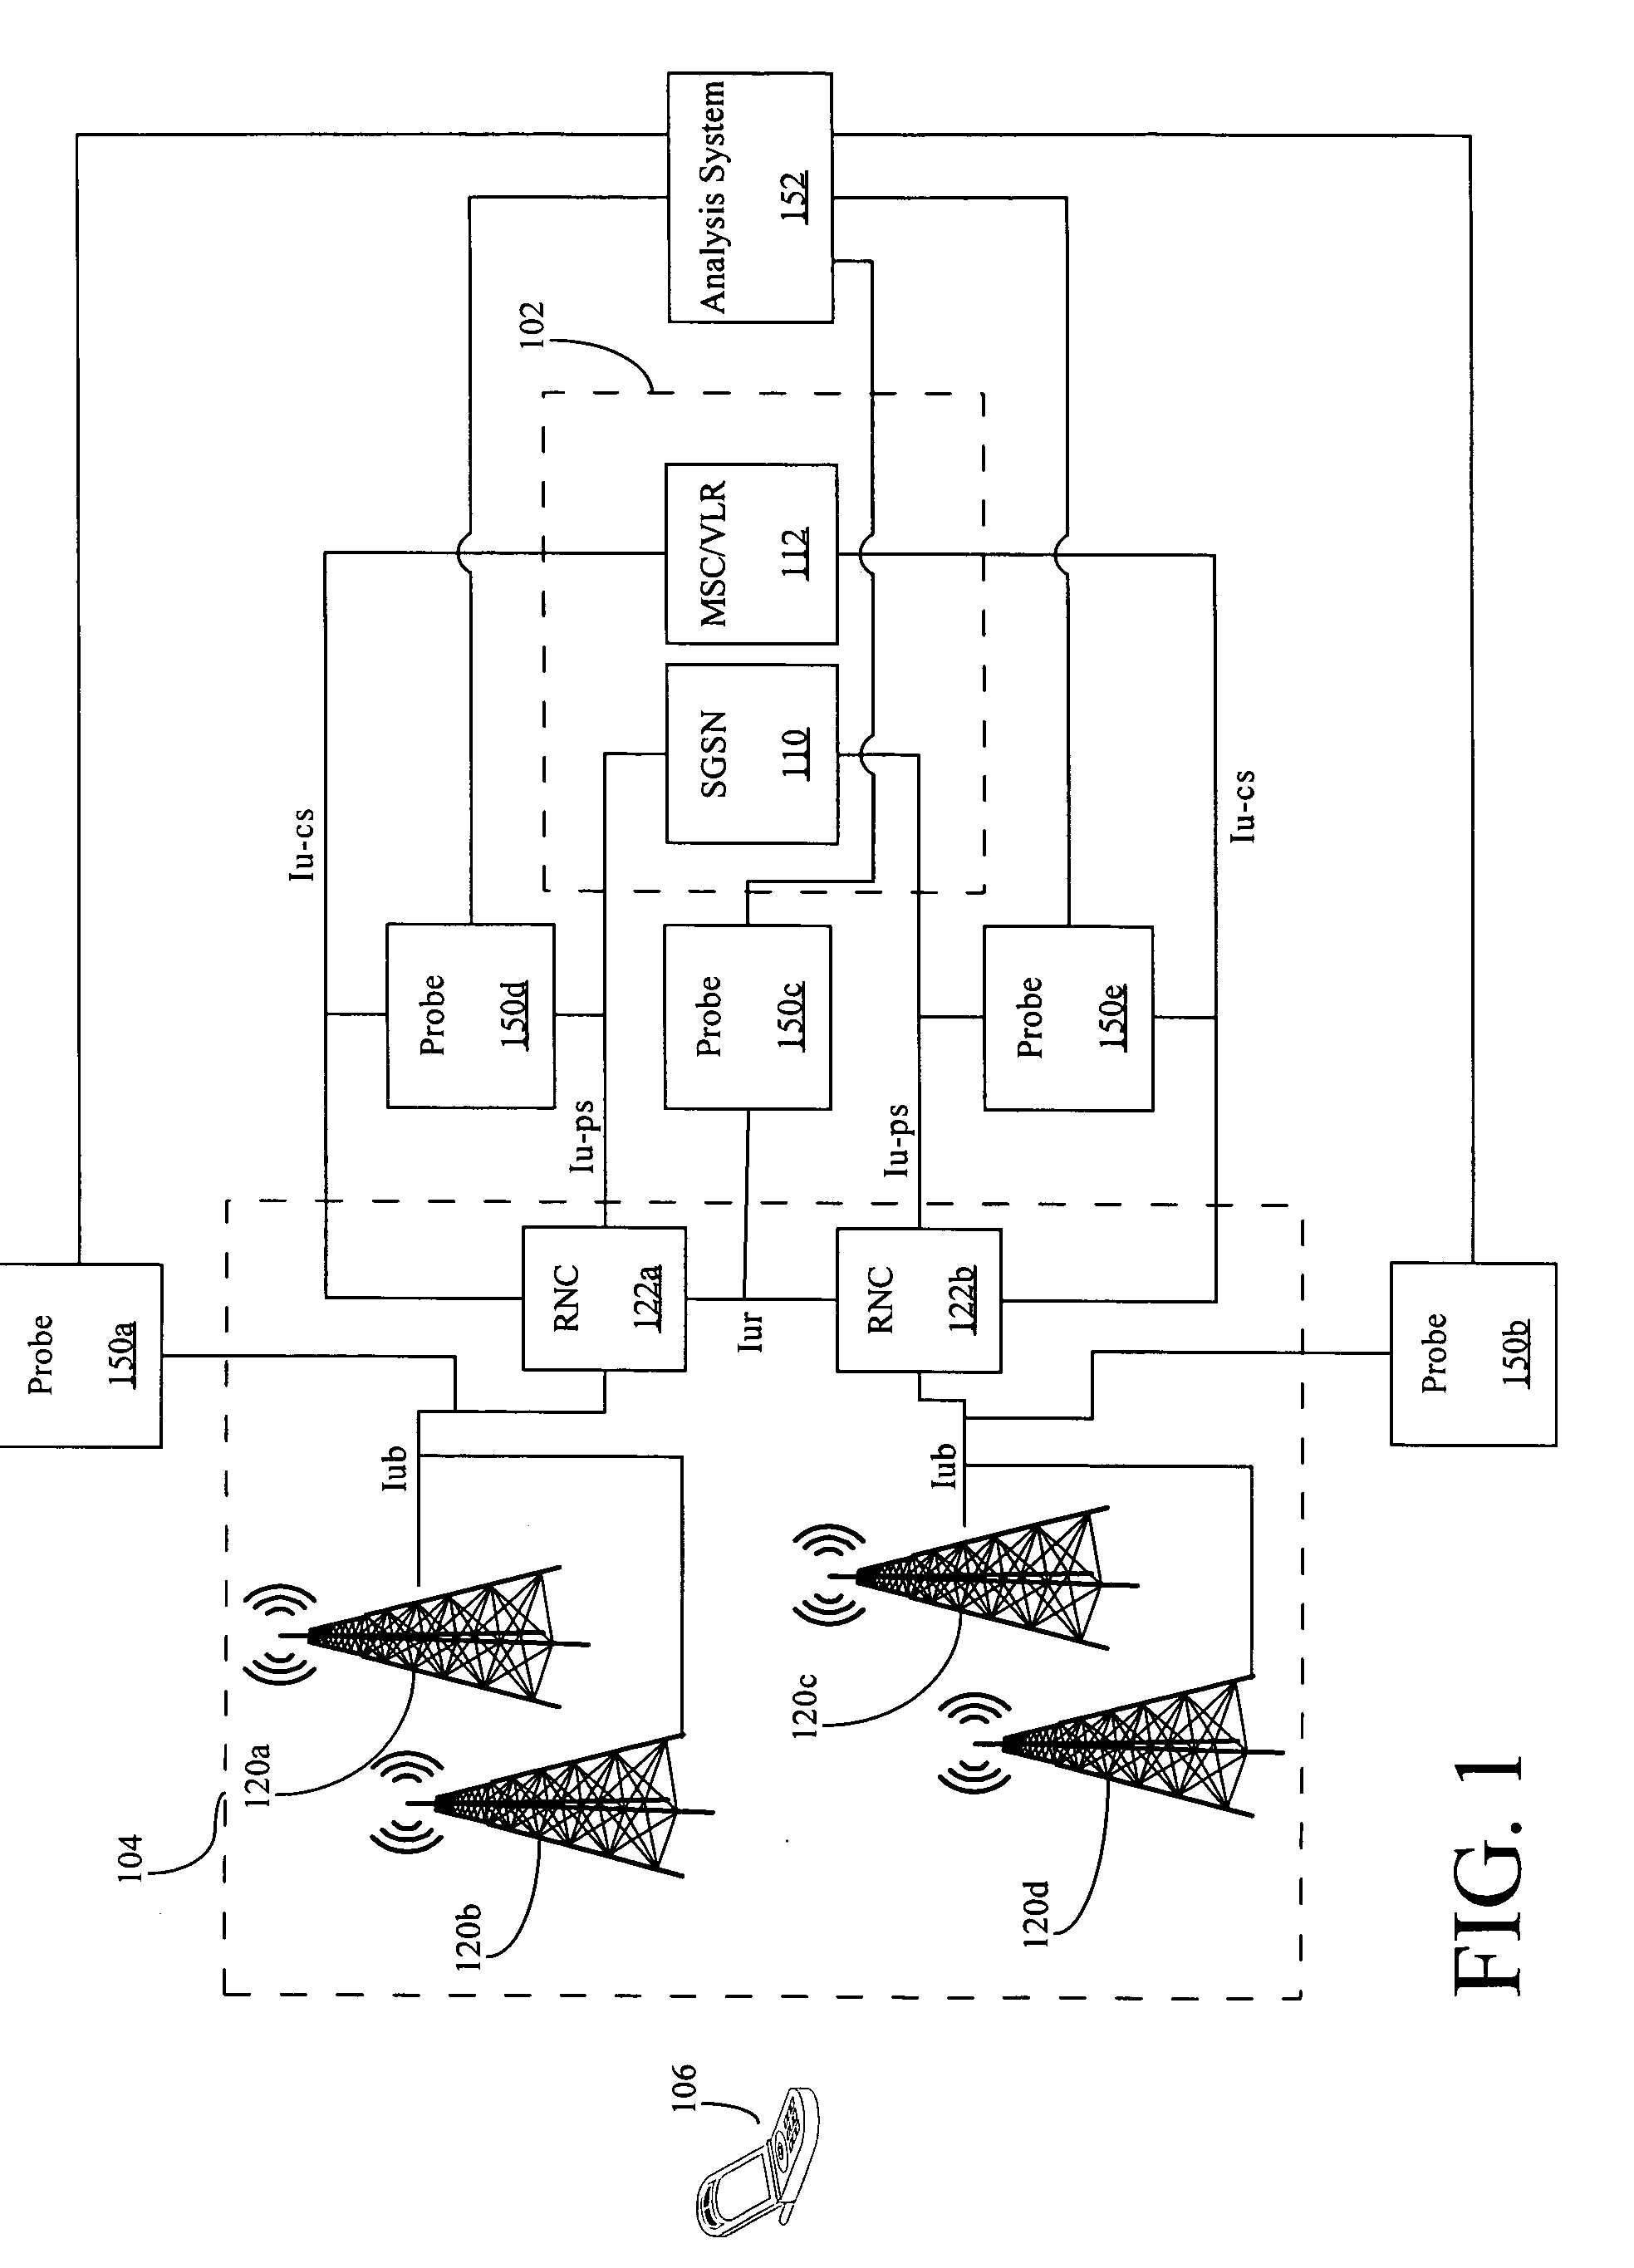 Method and apparatus for depicting quality of service in mobile networks